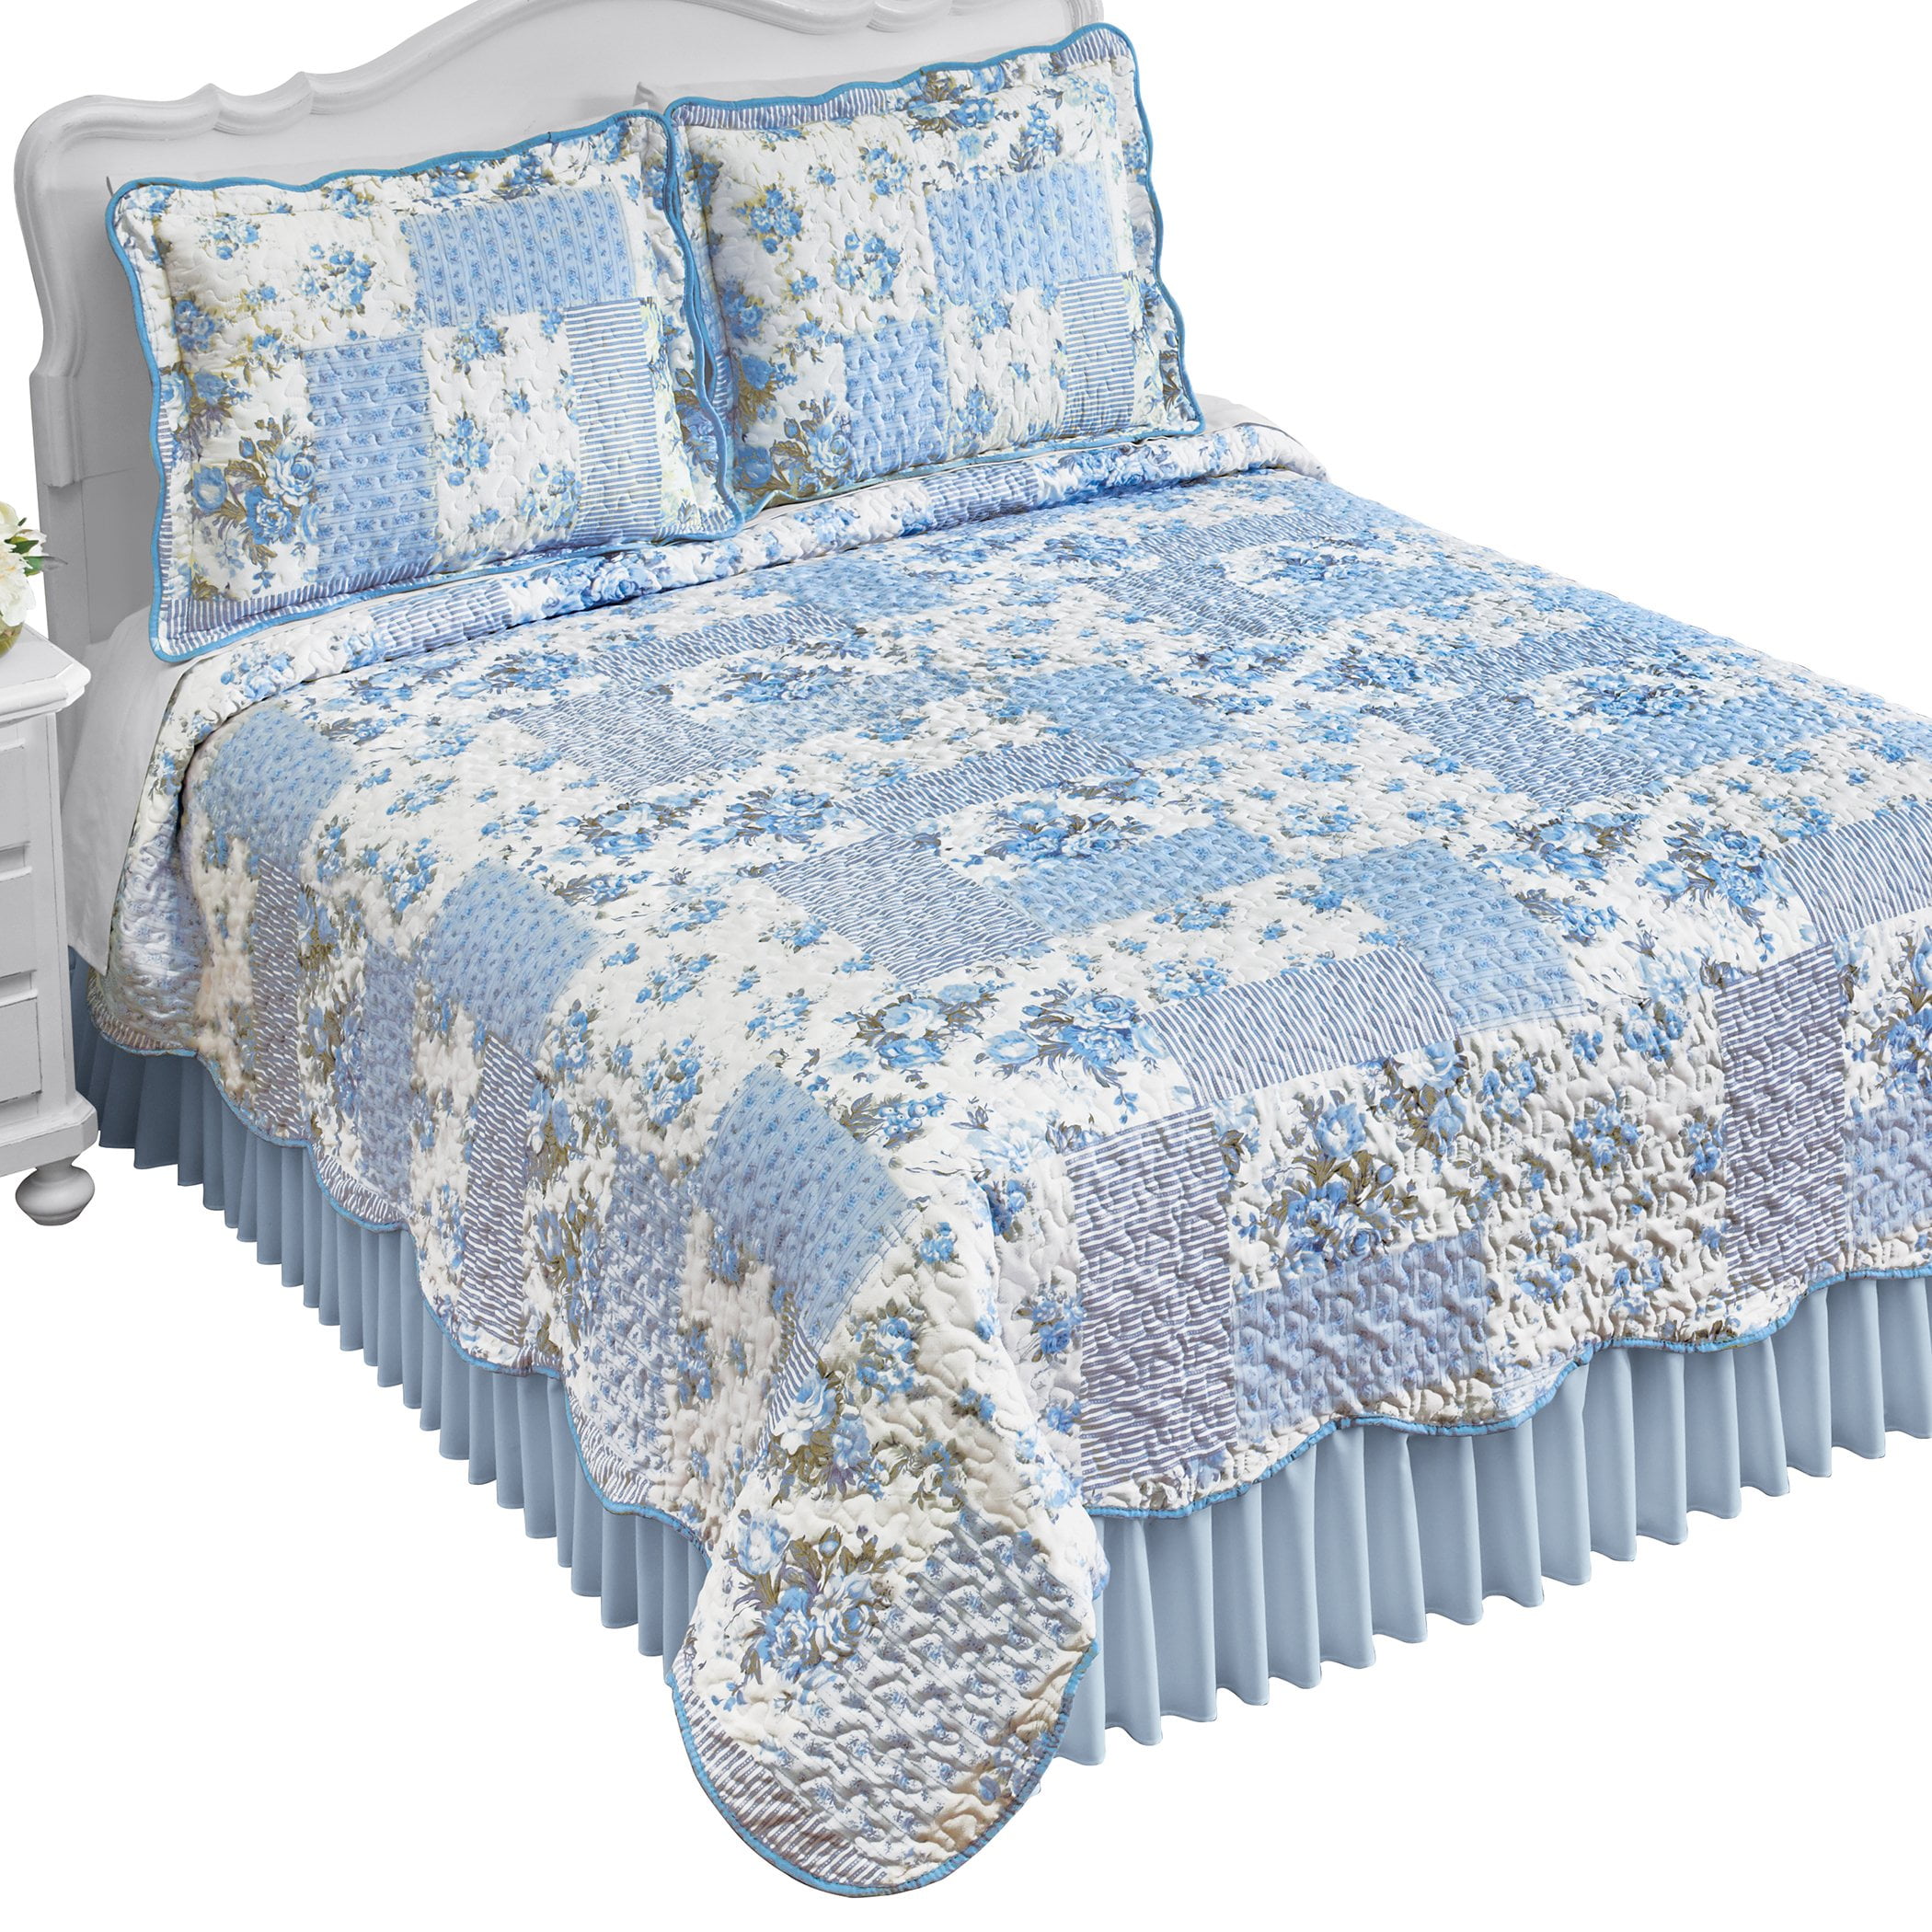 Blue Collections Etc Reversible Floral Quilt with Scalloped Edges and Two-Tone Design King